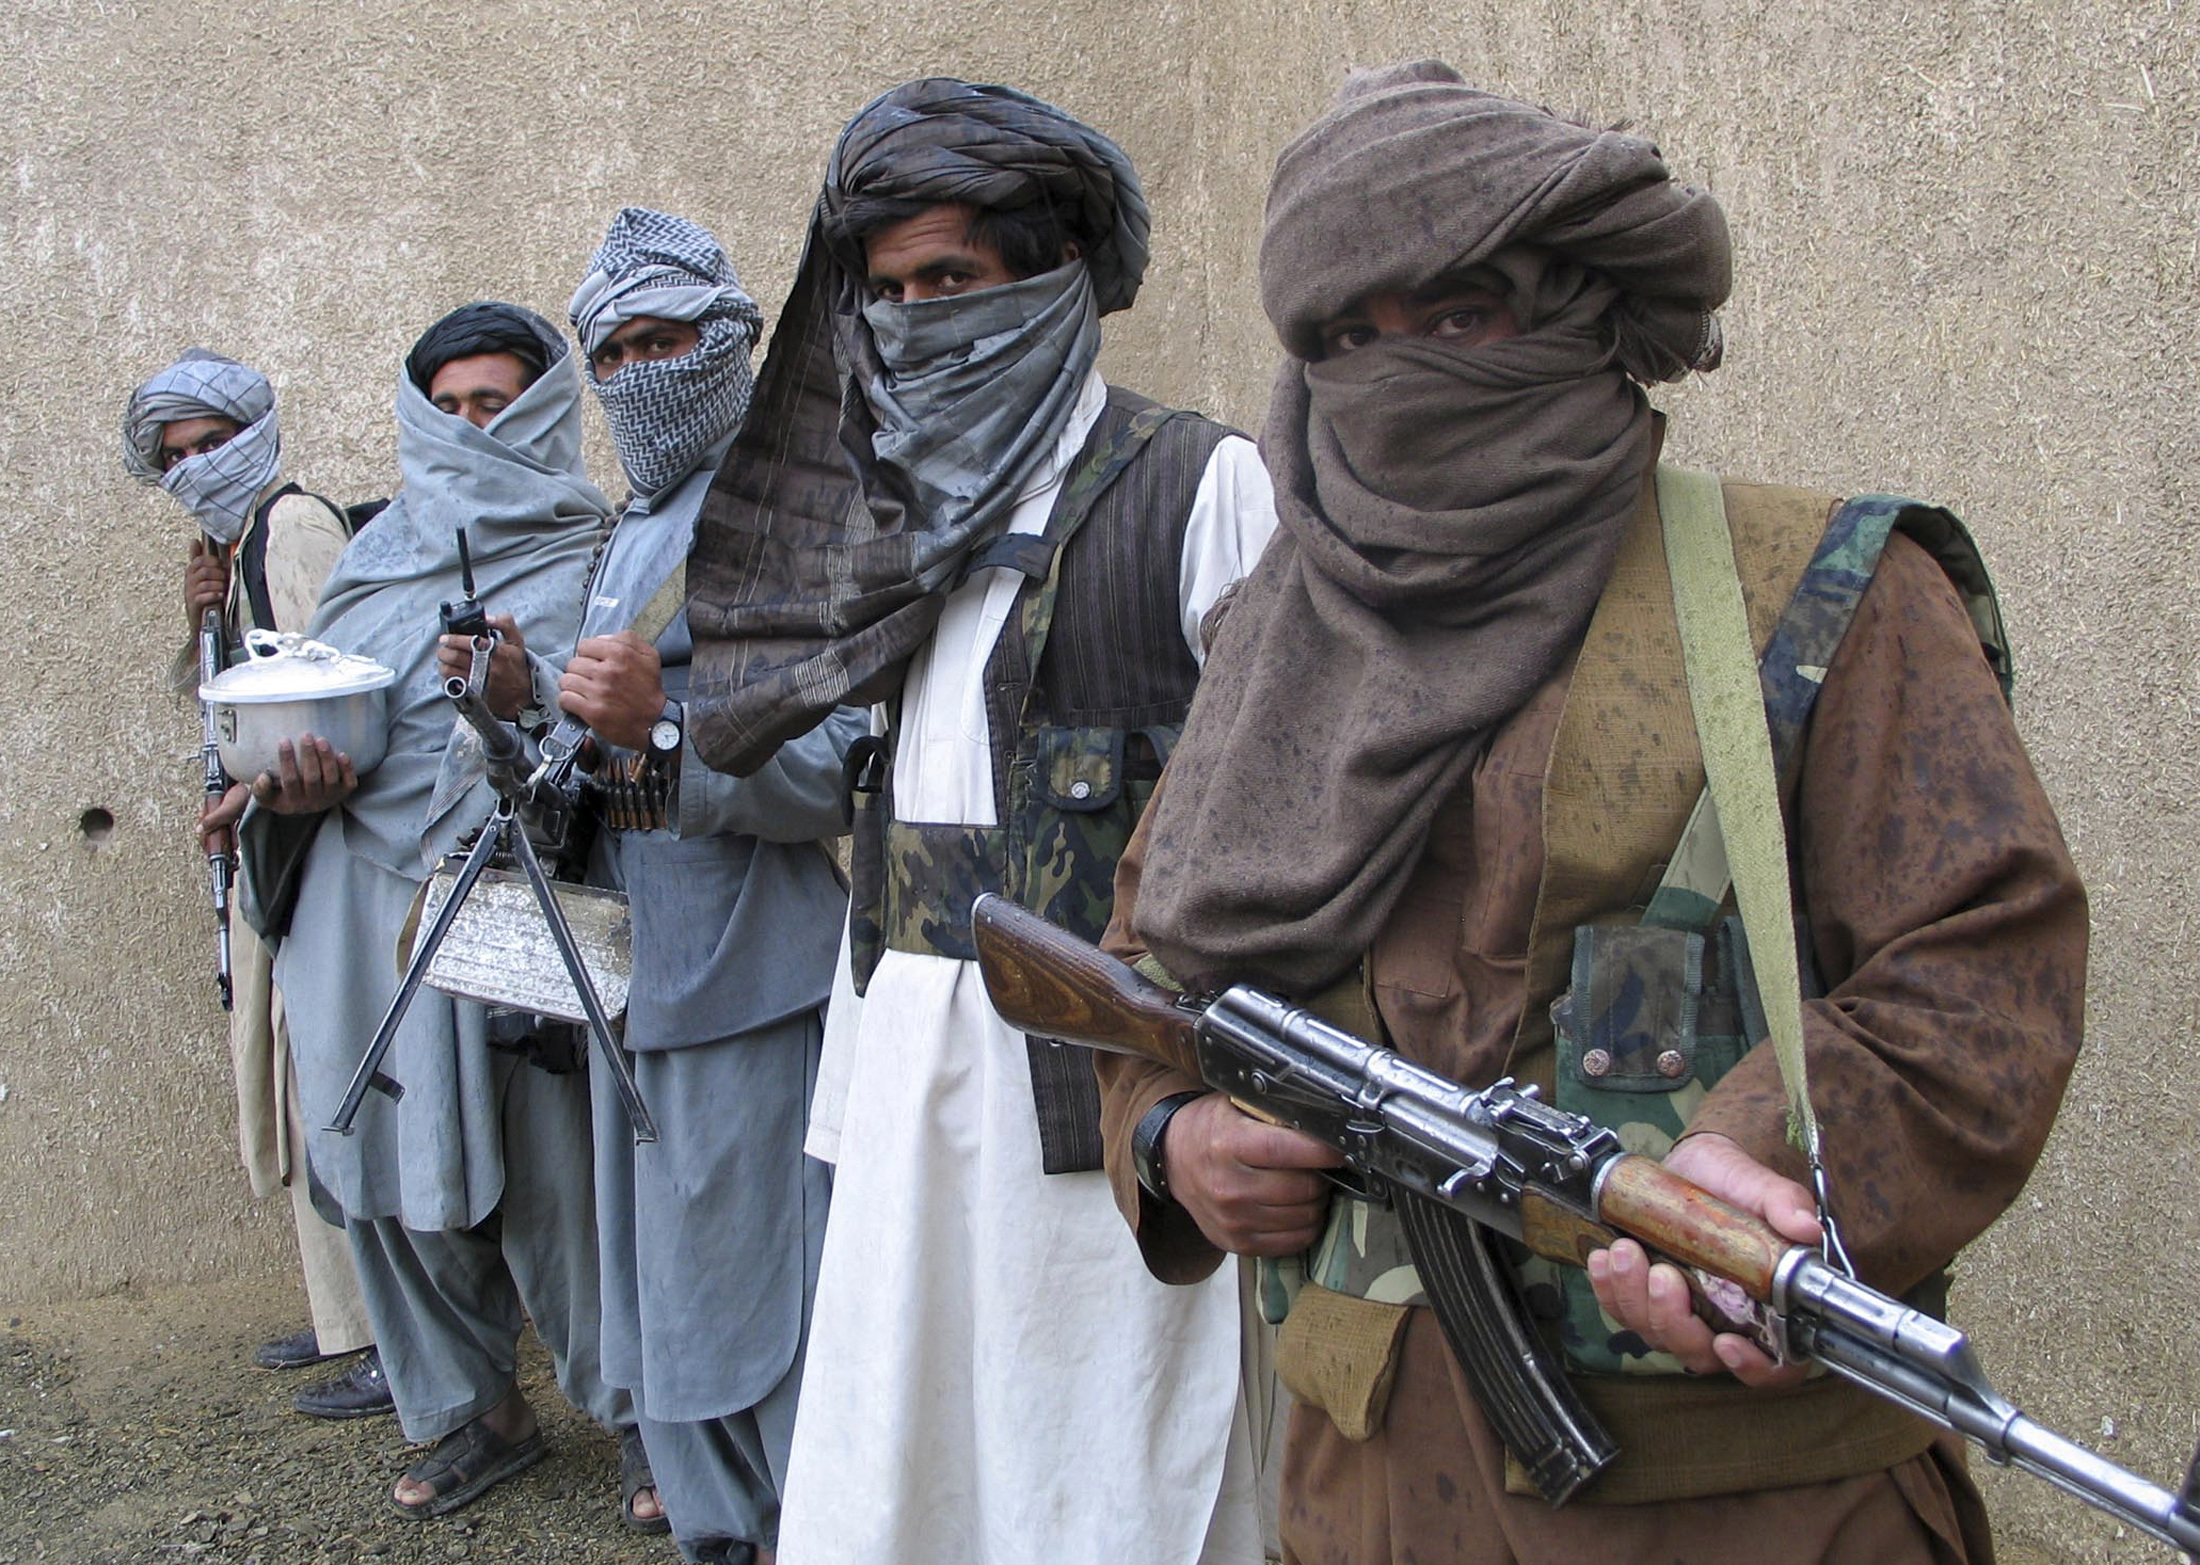 Taliban guerrilla fighters hold their weapons at a secret base in eastern Afghanistan February 3, 2007. The Taliban promised a spring offensive of thousands of suicide bombers as the United States, doubling its combat troops in Afghanistan, took over command of the 33,000- strong NATO force in the country on Sunday. Picture taken February 3, 2007. REUTERS/Saeed Ali Achakzai (PAKISTAN)